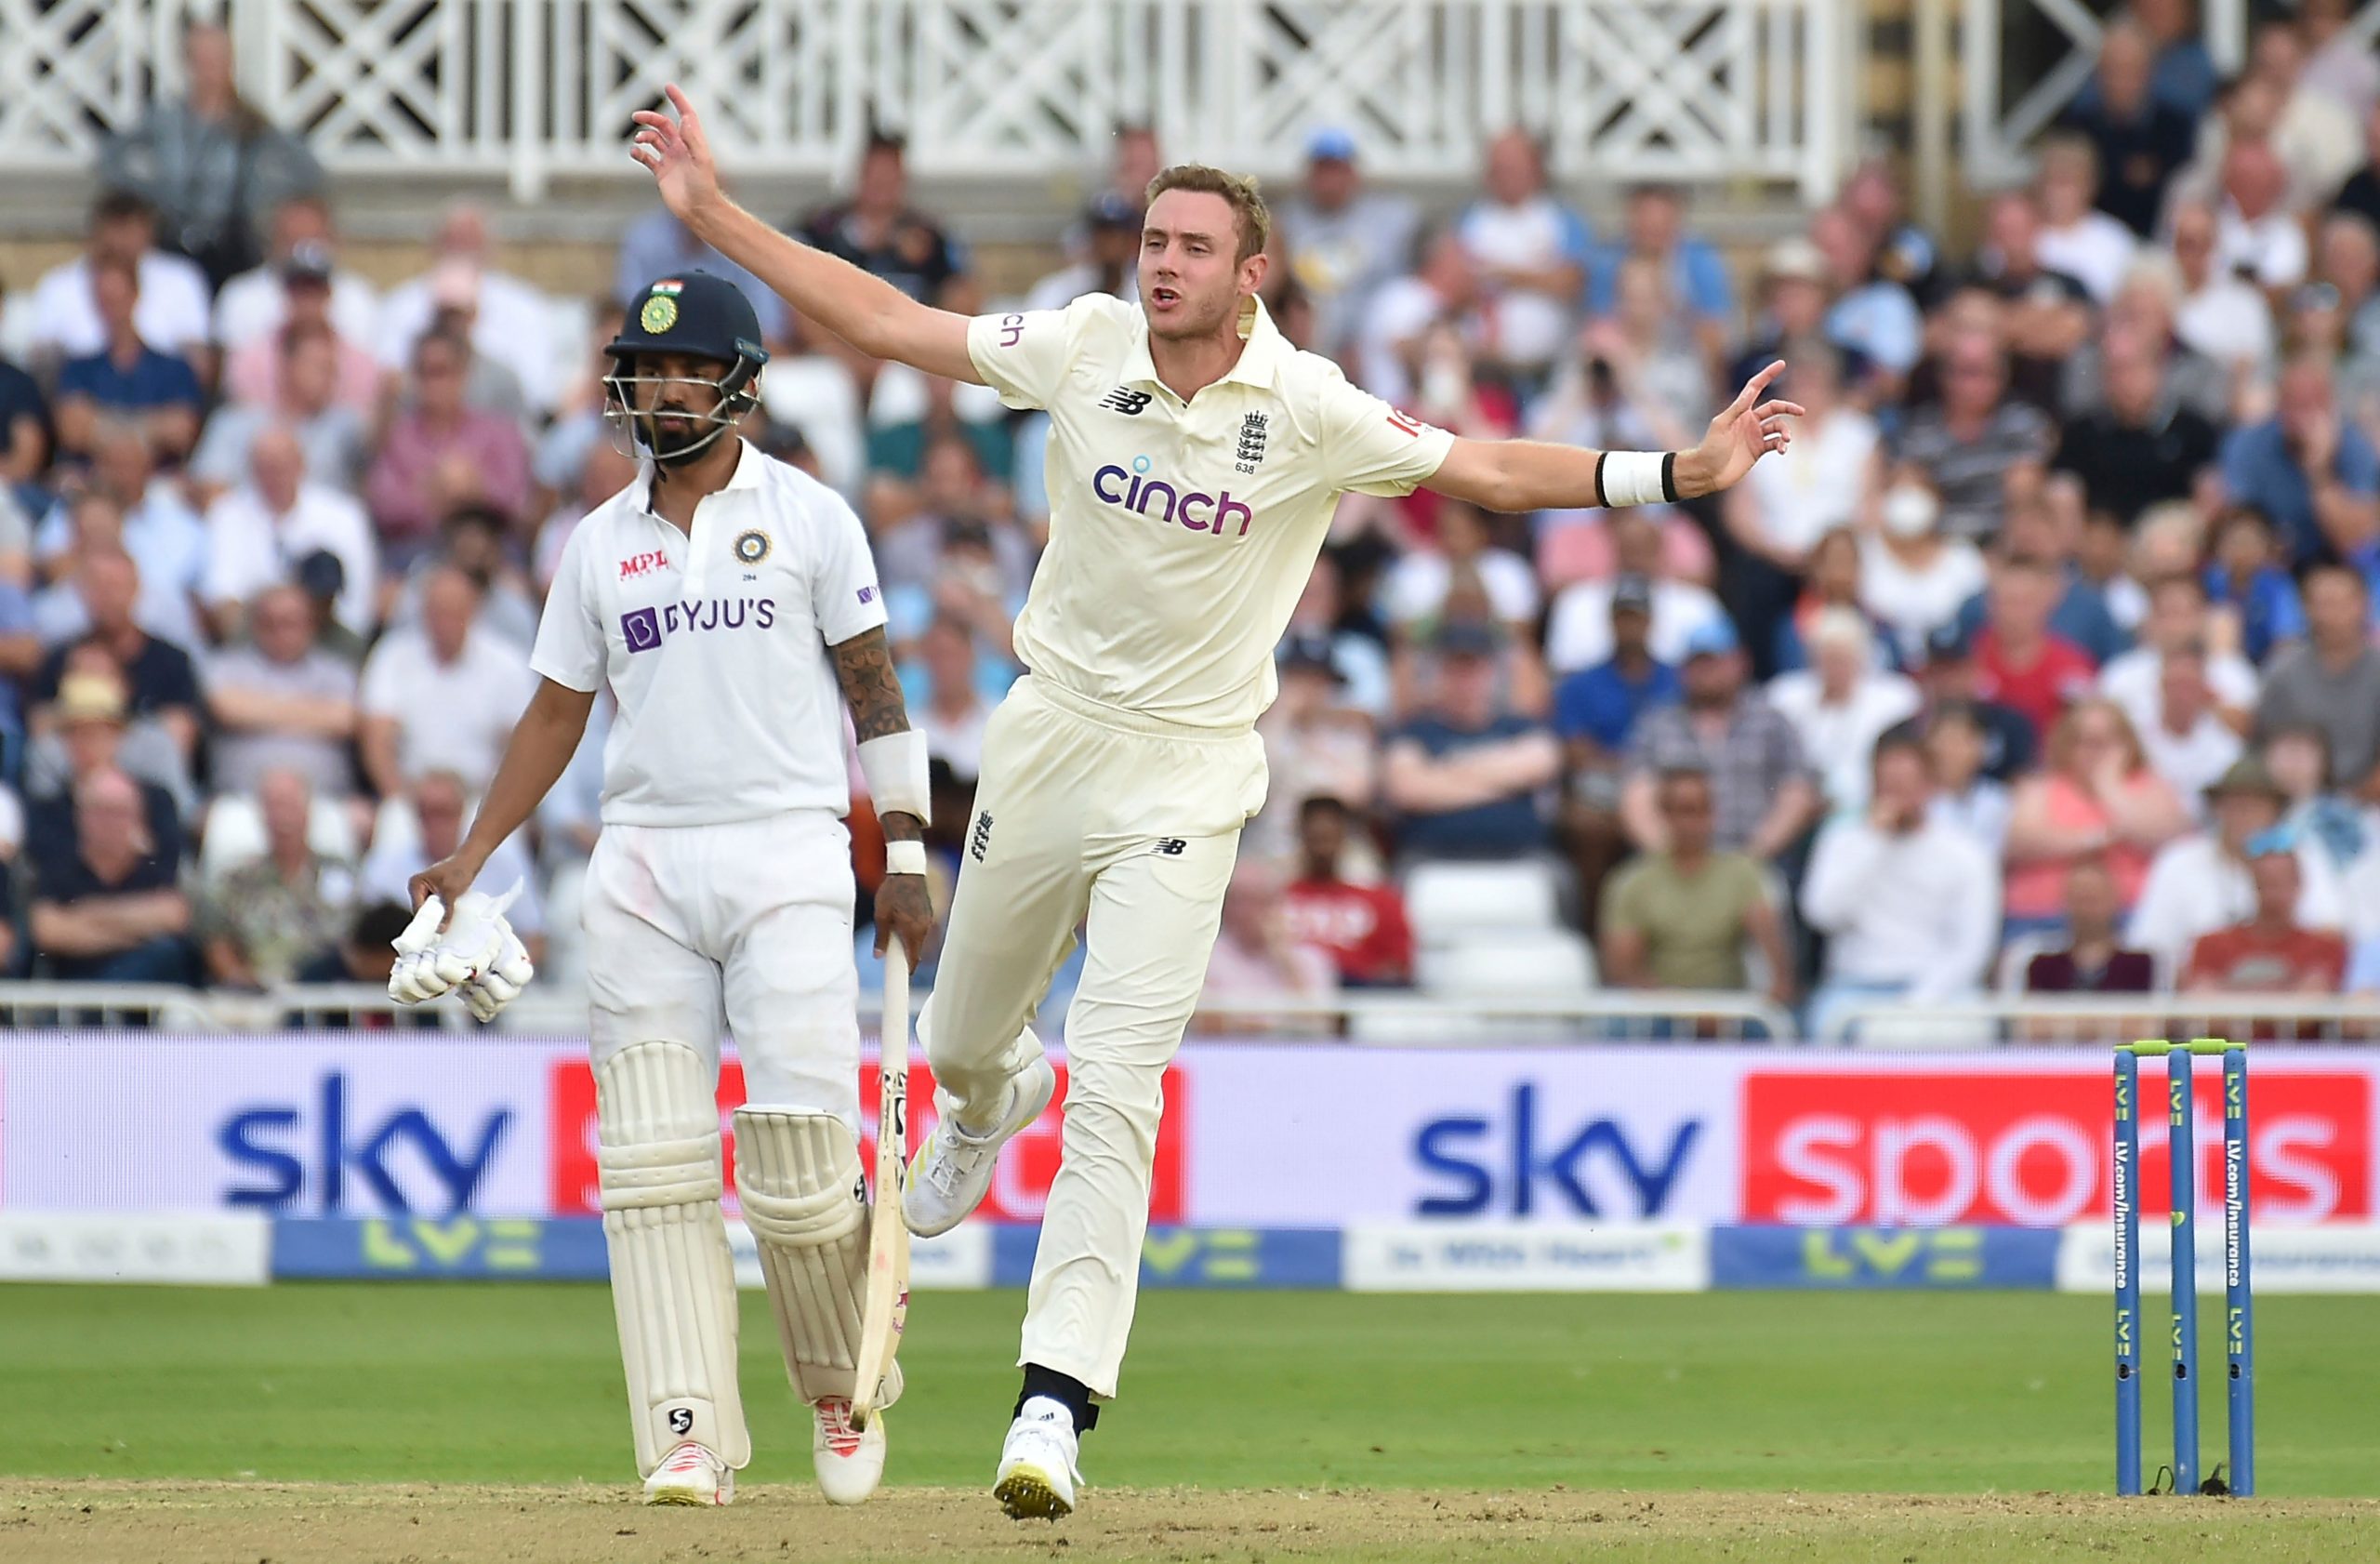 England may play second Test without pace duo of Stuart Broad, James Anderson